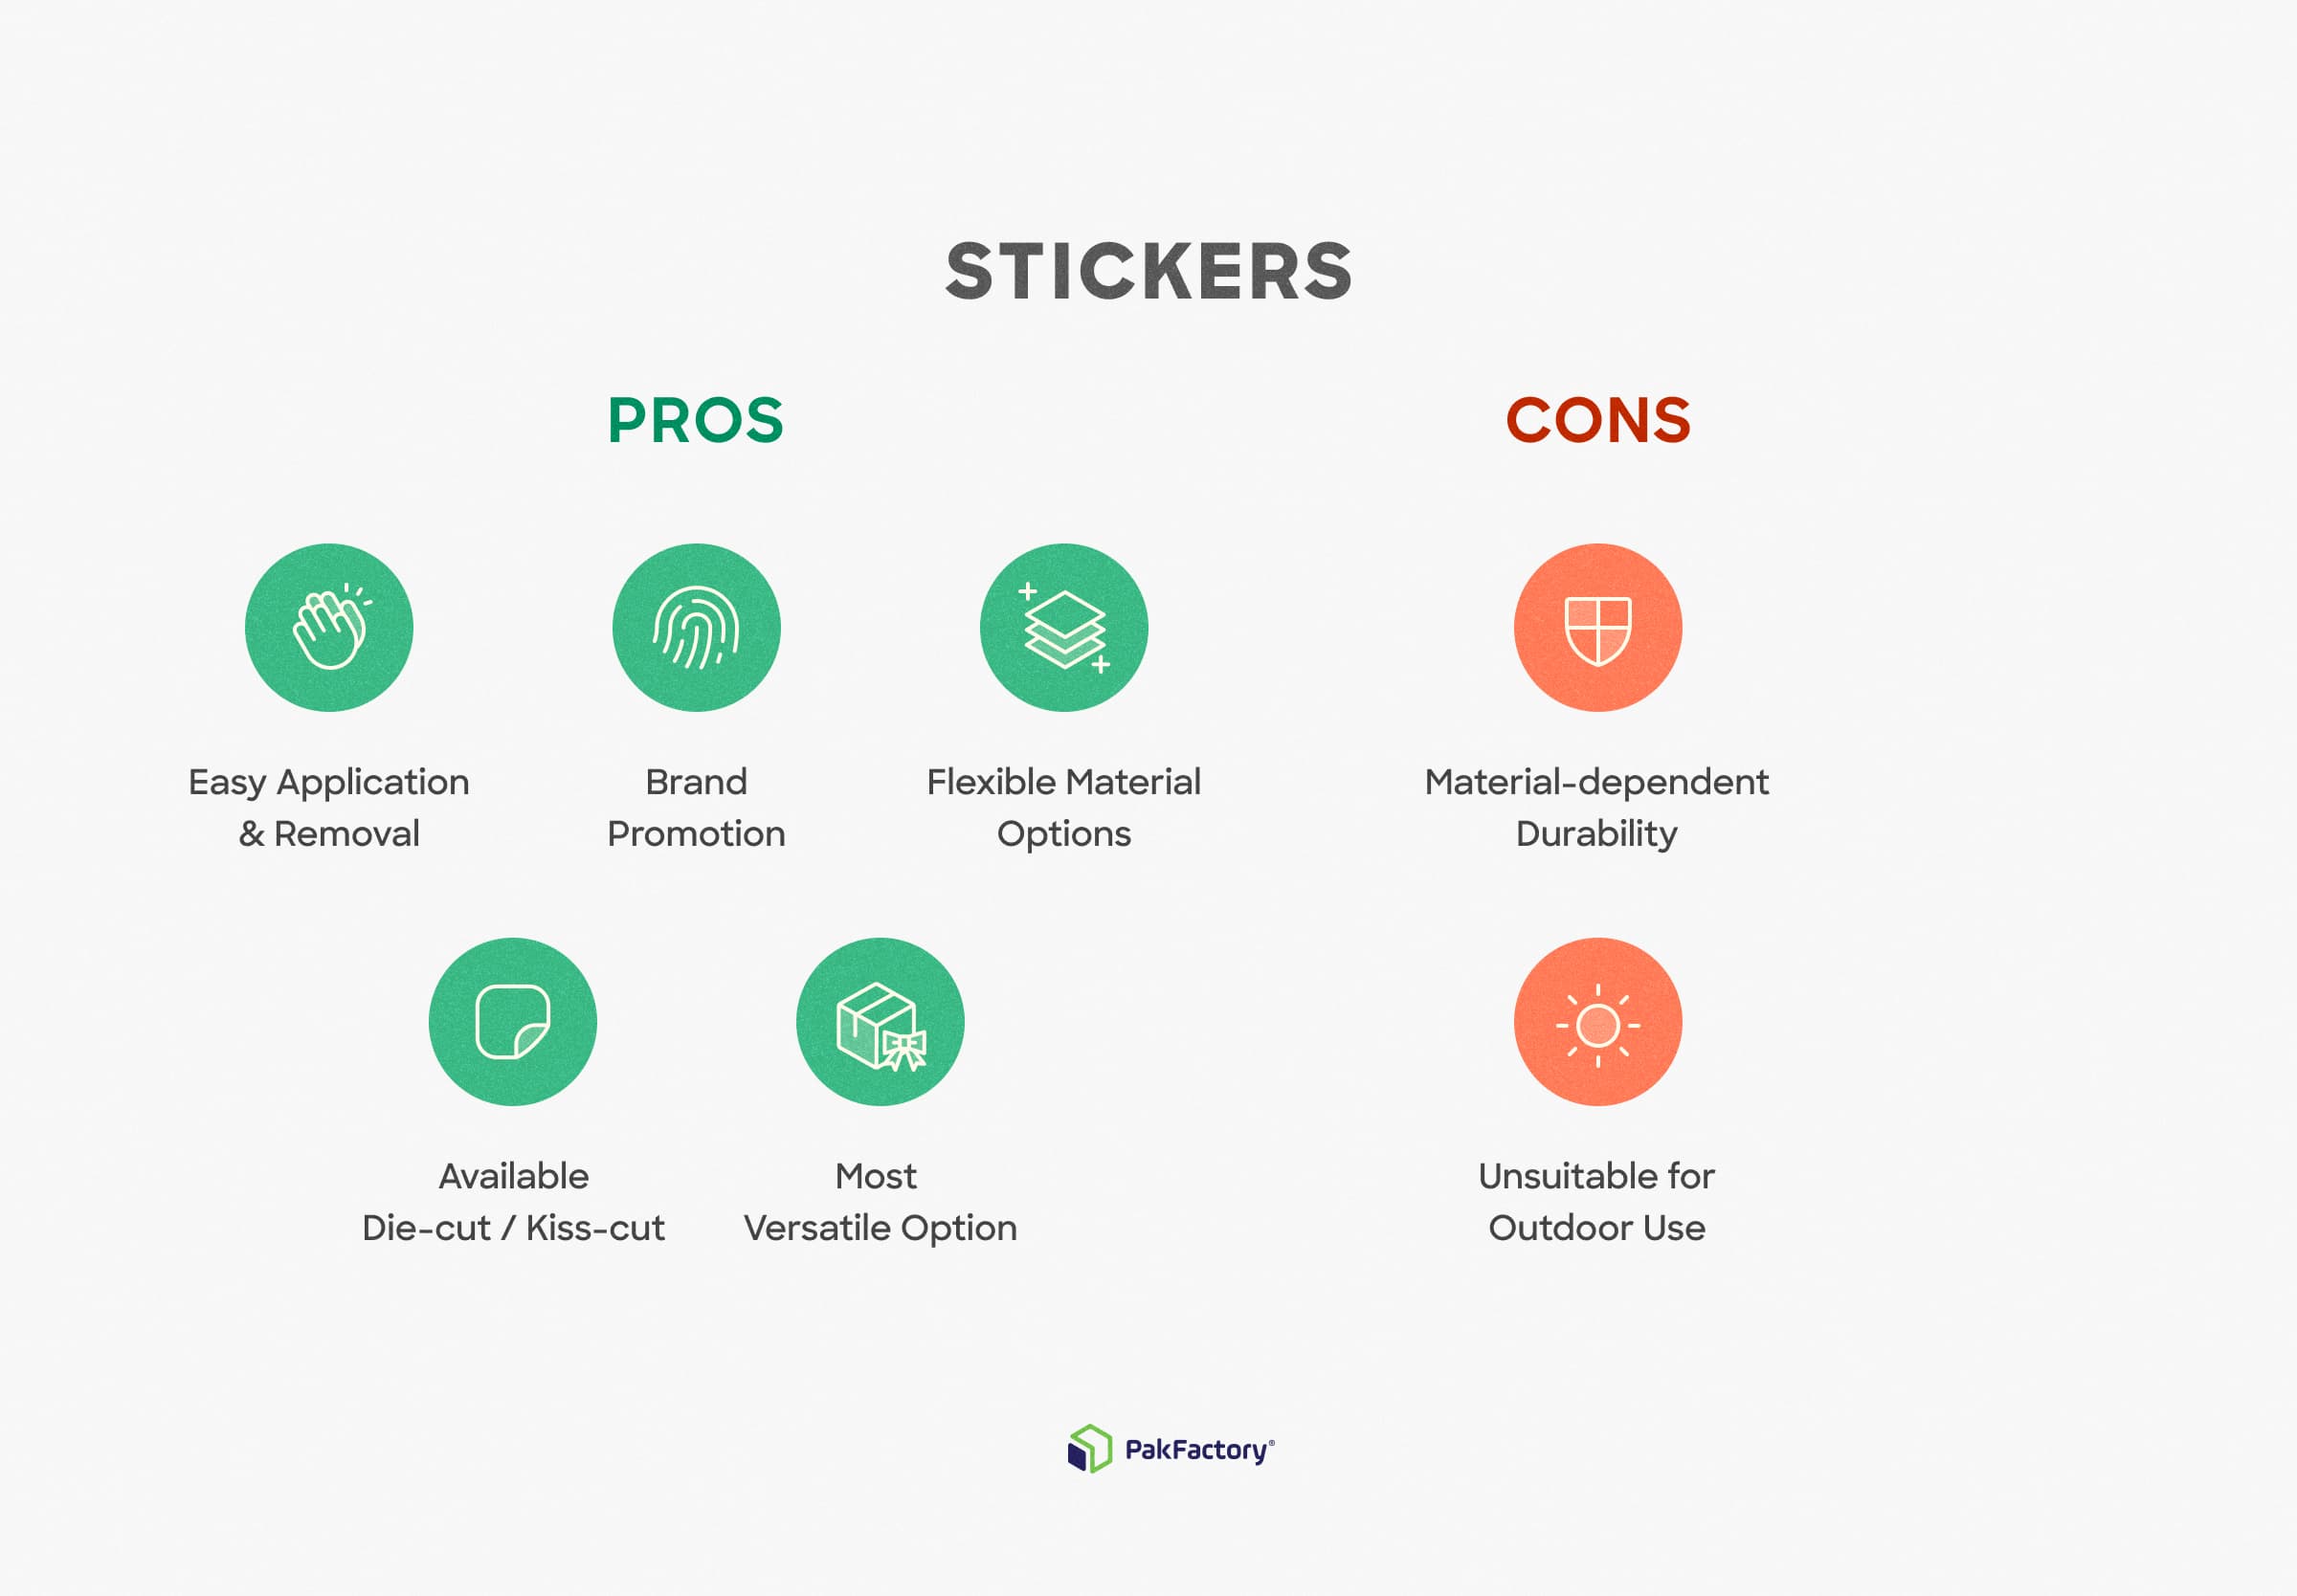 the pros and cons diagram of stickers